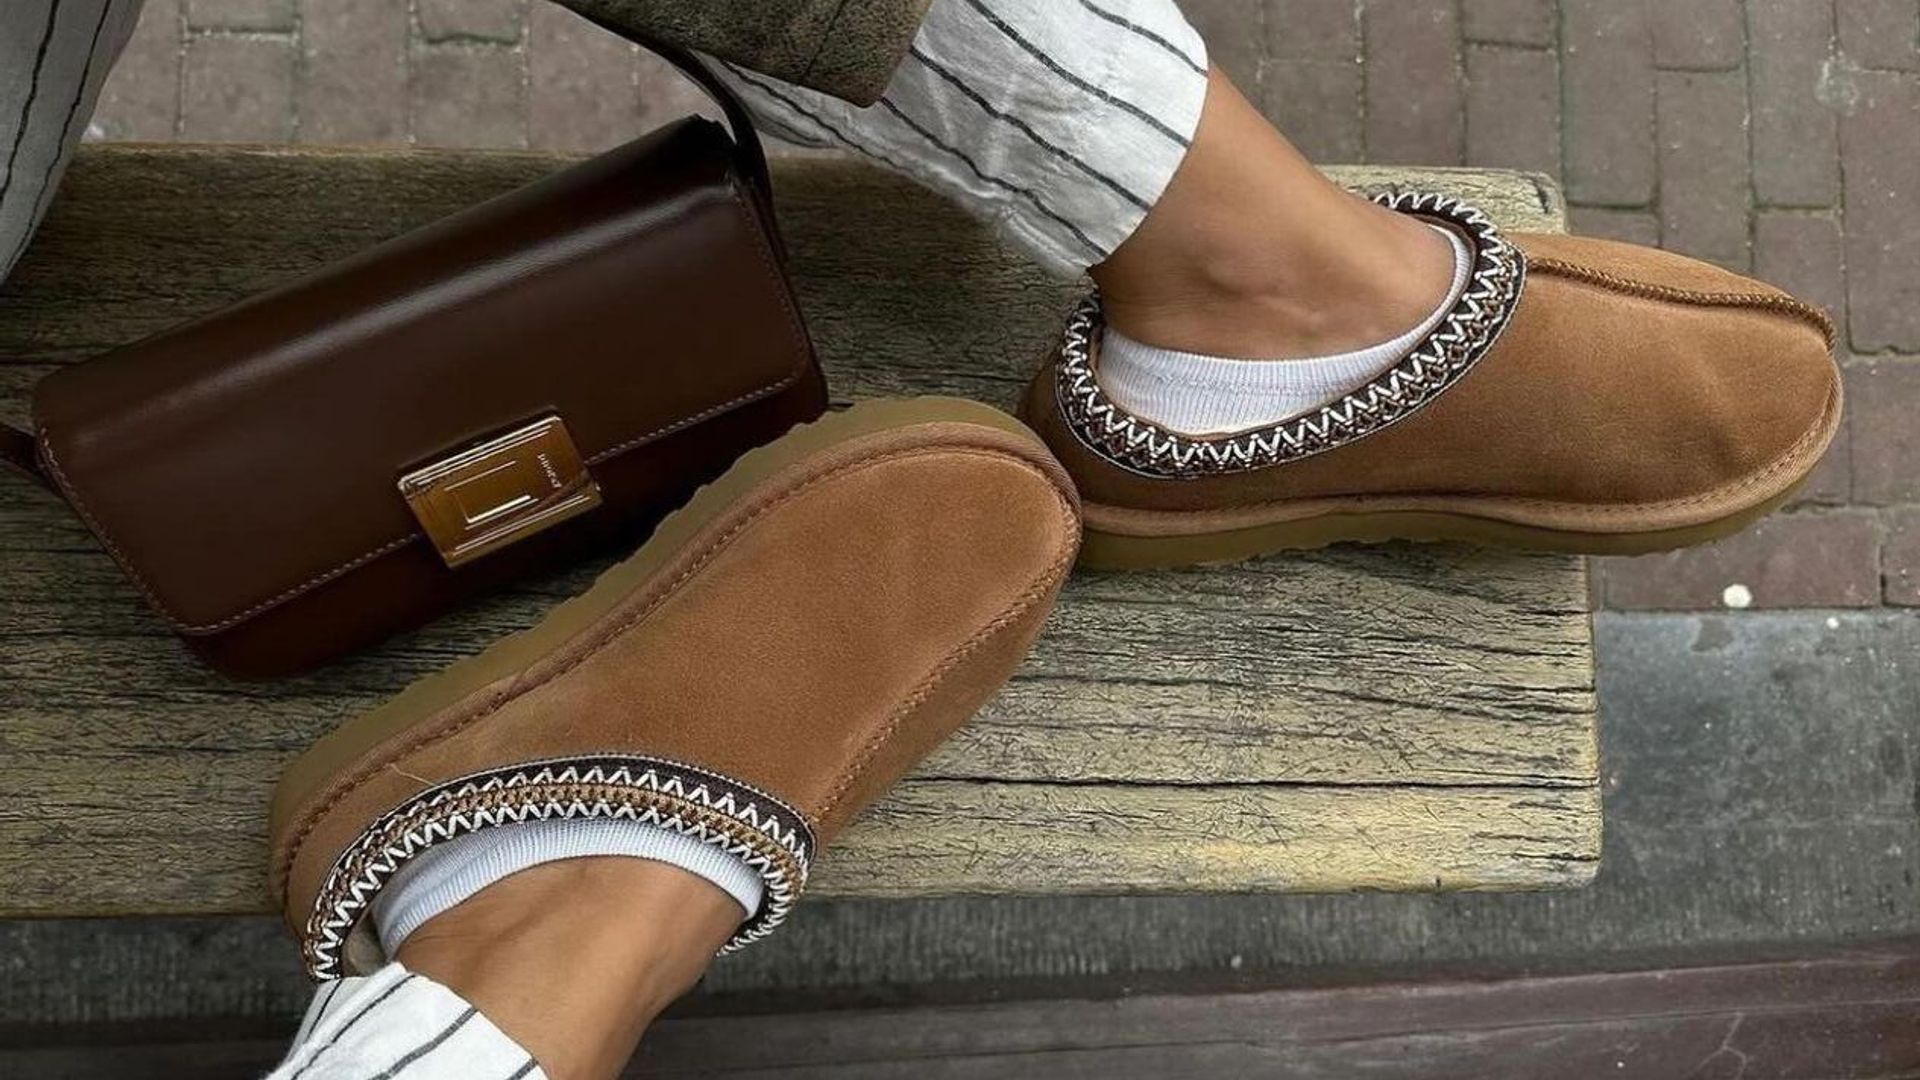 Tasman Ugg slippers are the ultimate cool-girl shoe